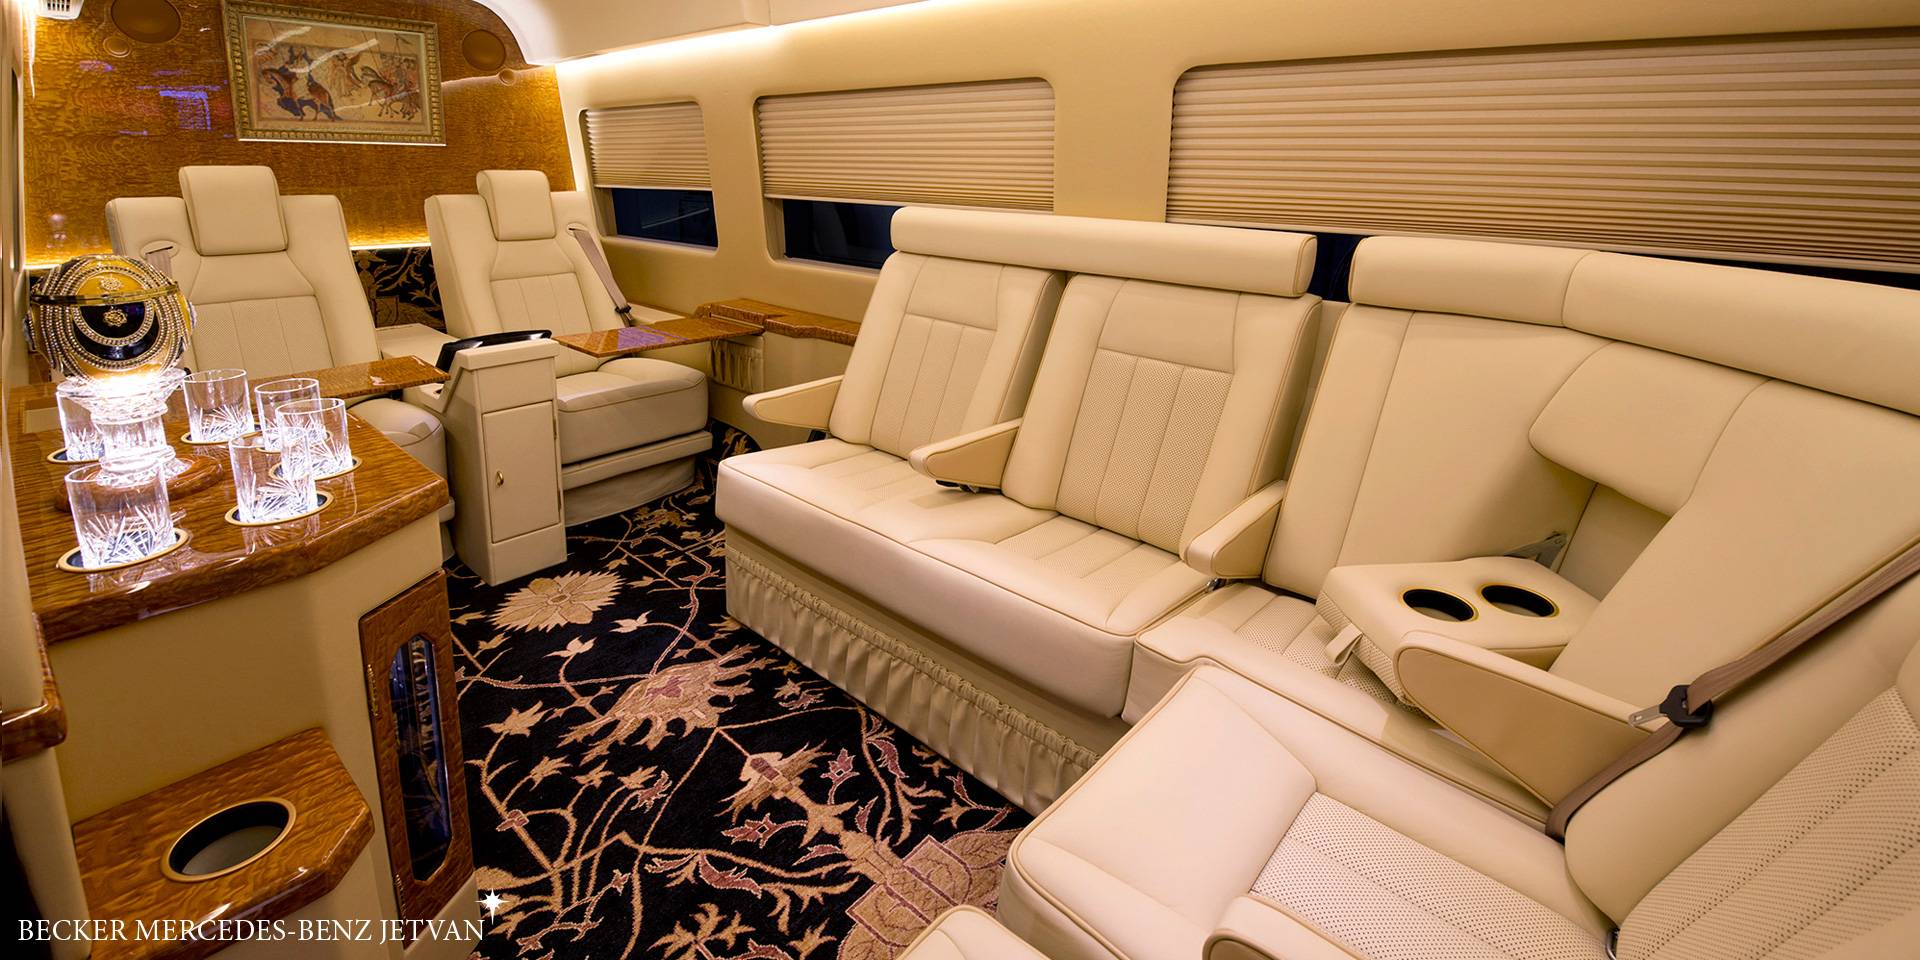 Peek Inside These Luxury Vans for the Rich and Famous